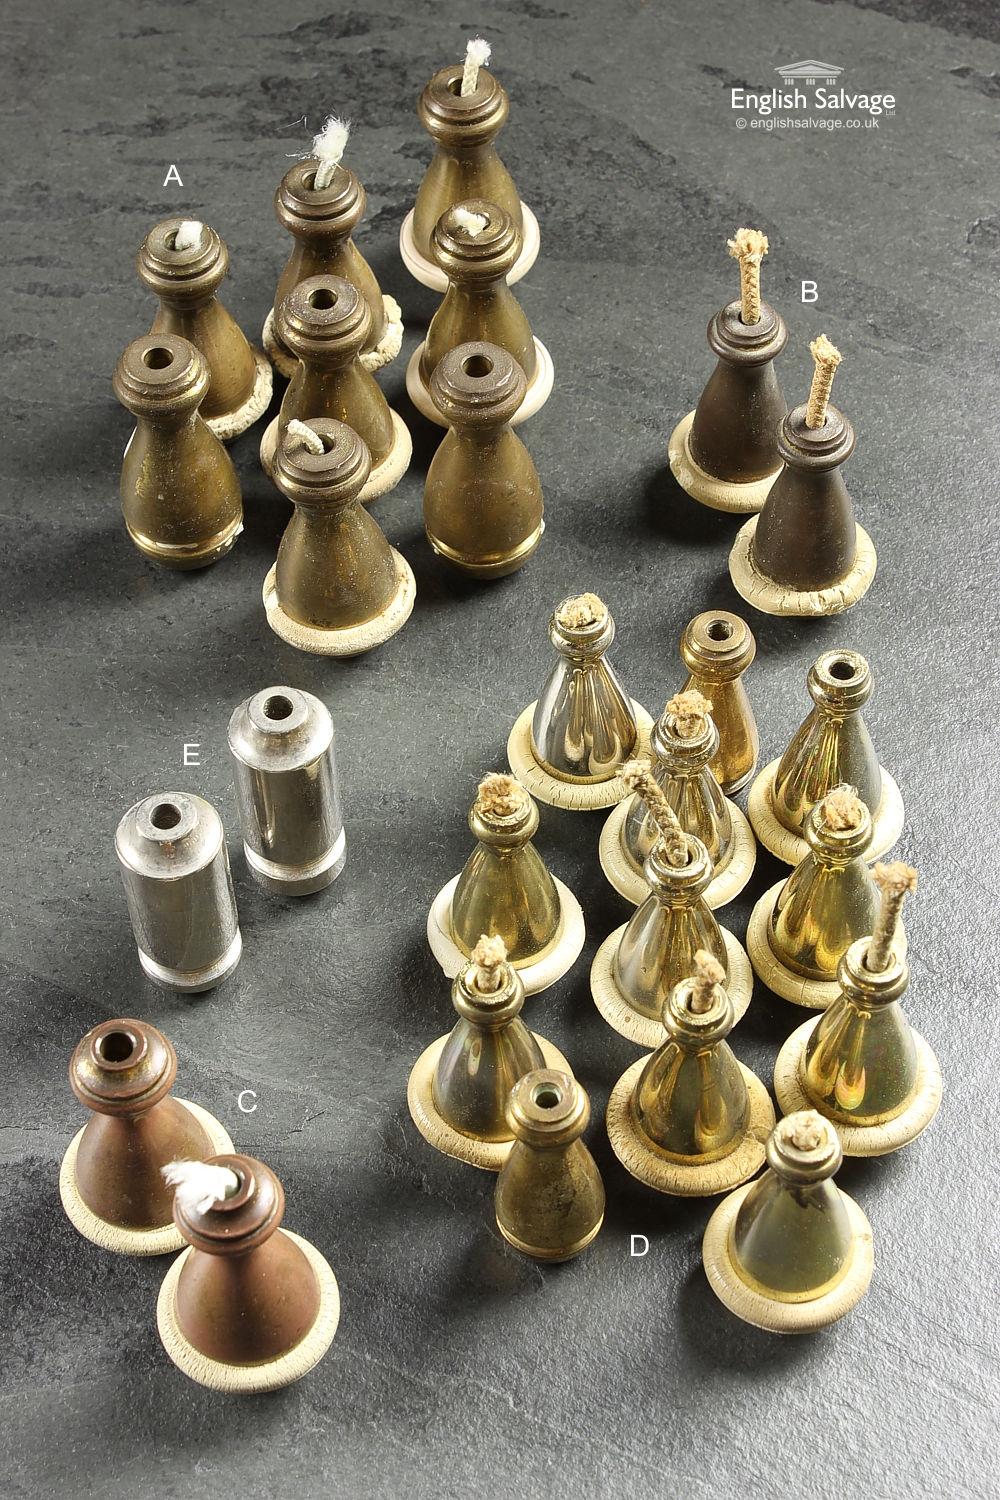 Reclaimed variety of brass and nickel-plated blind, sash weights or pulls, approximate height between 5 and 6 cm. Quantities as follows:-
A = 8 / B = 2 / C = 2 / D = 12 and E sold.